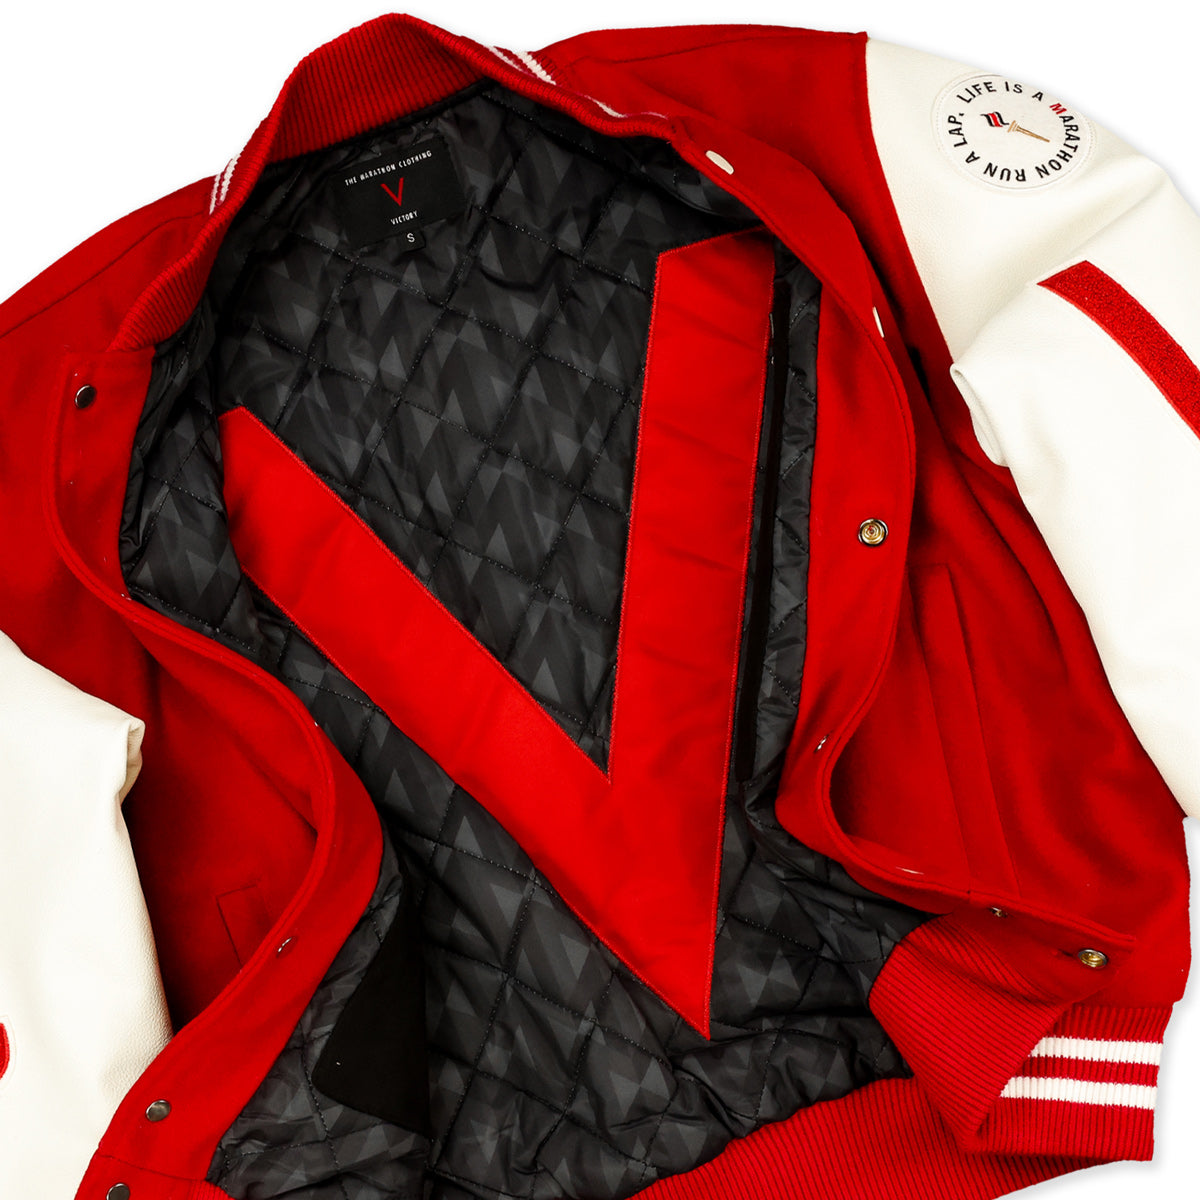 The Marathon Clothing - Crenshaw Letterman Jacket - Red - Quilted Lining